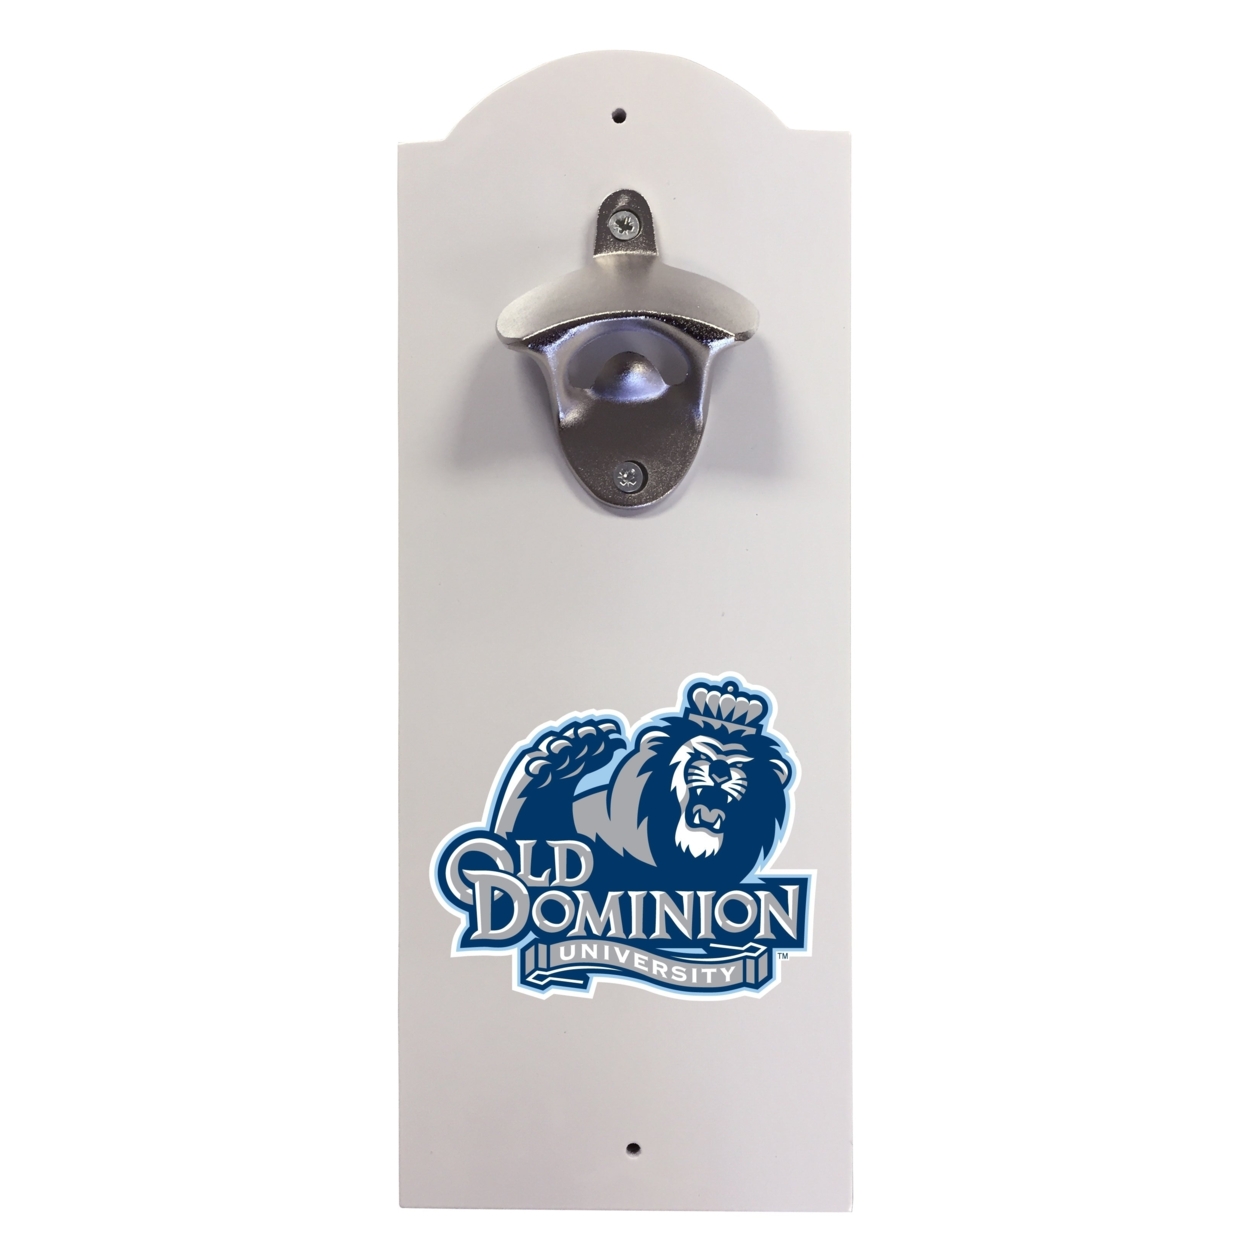 Old Dominion Monarchs Wall Mounted Bottle Opener